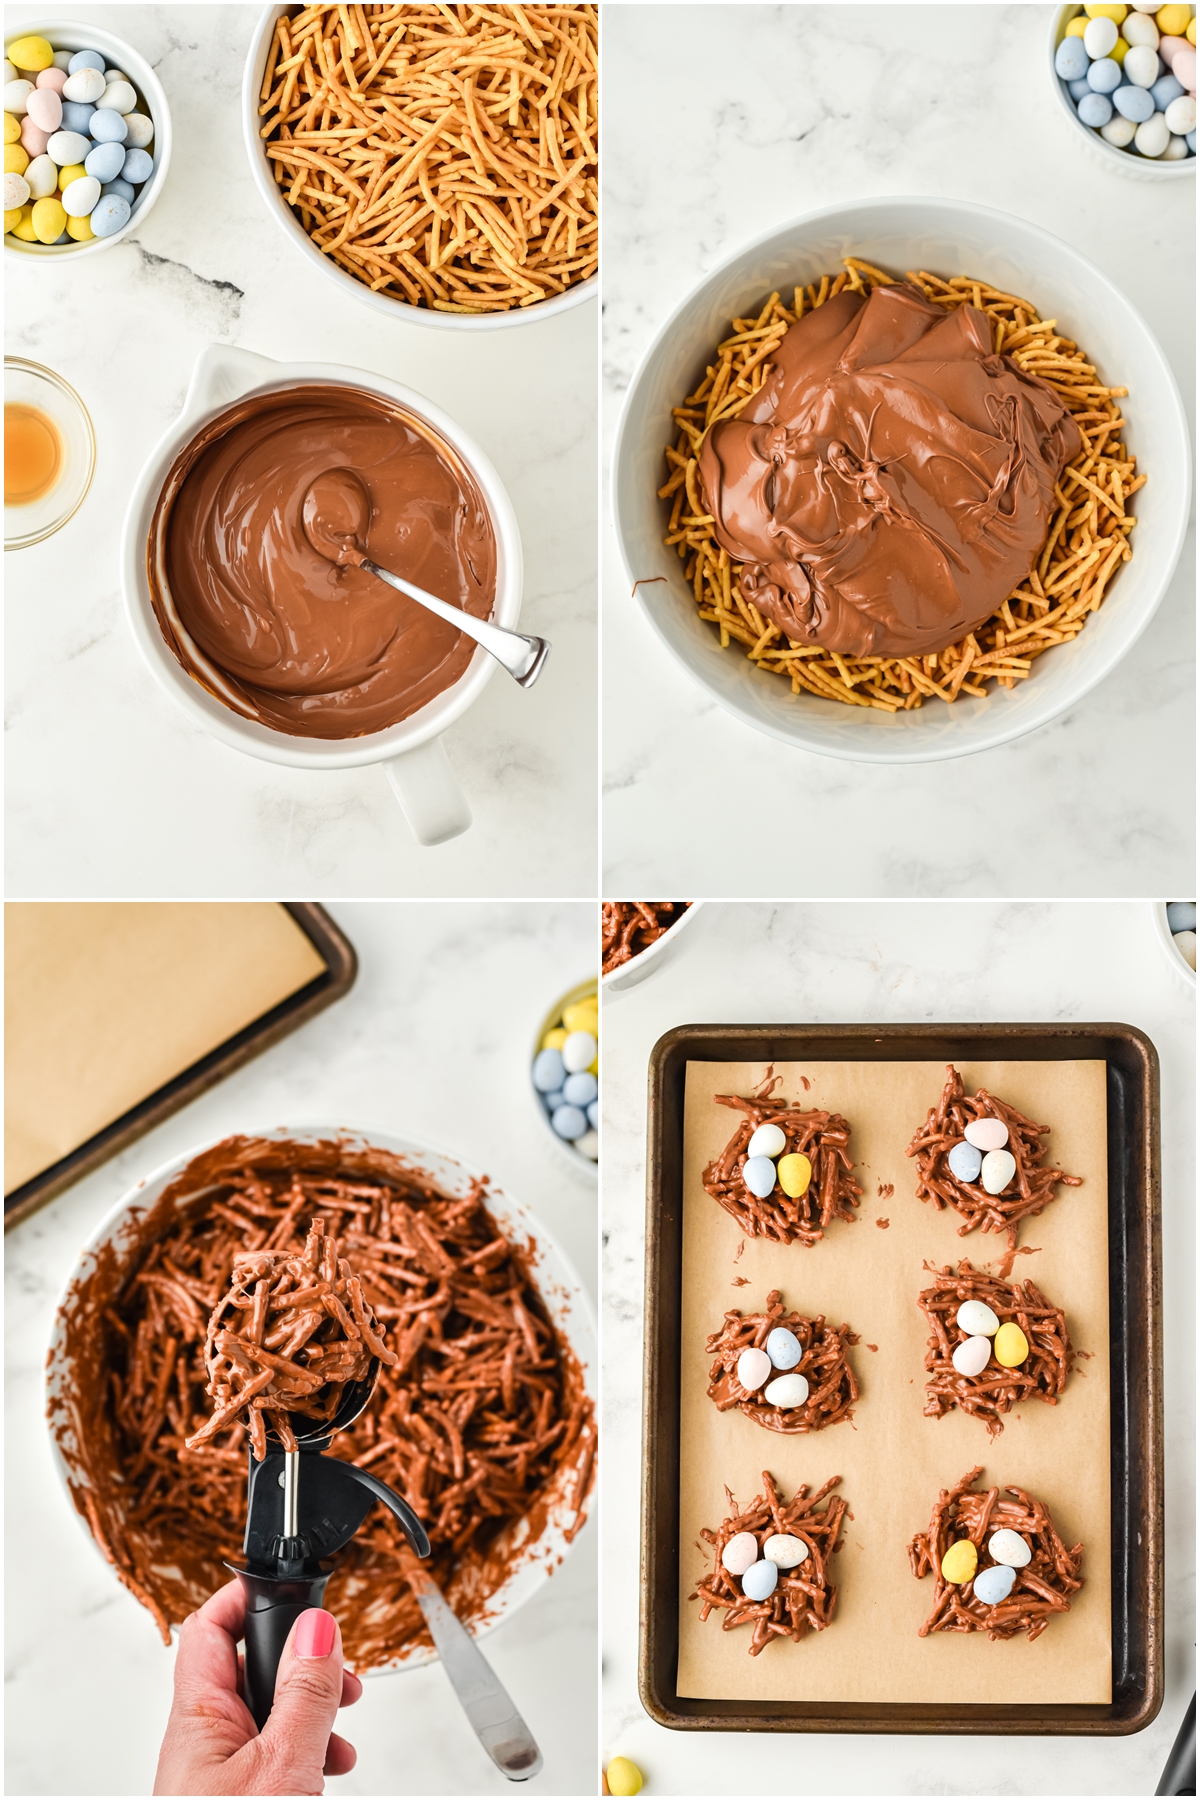 A step by step process of making Bird's nest cookies. Starting with melting the chocolate, pouring it into a bowl of noodles and mixing them. Then scooping them to form a cookie. Arranging them to tray and putting egg chocolate toppings